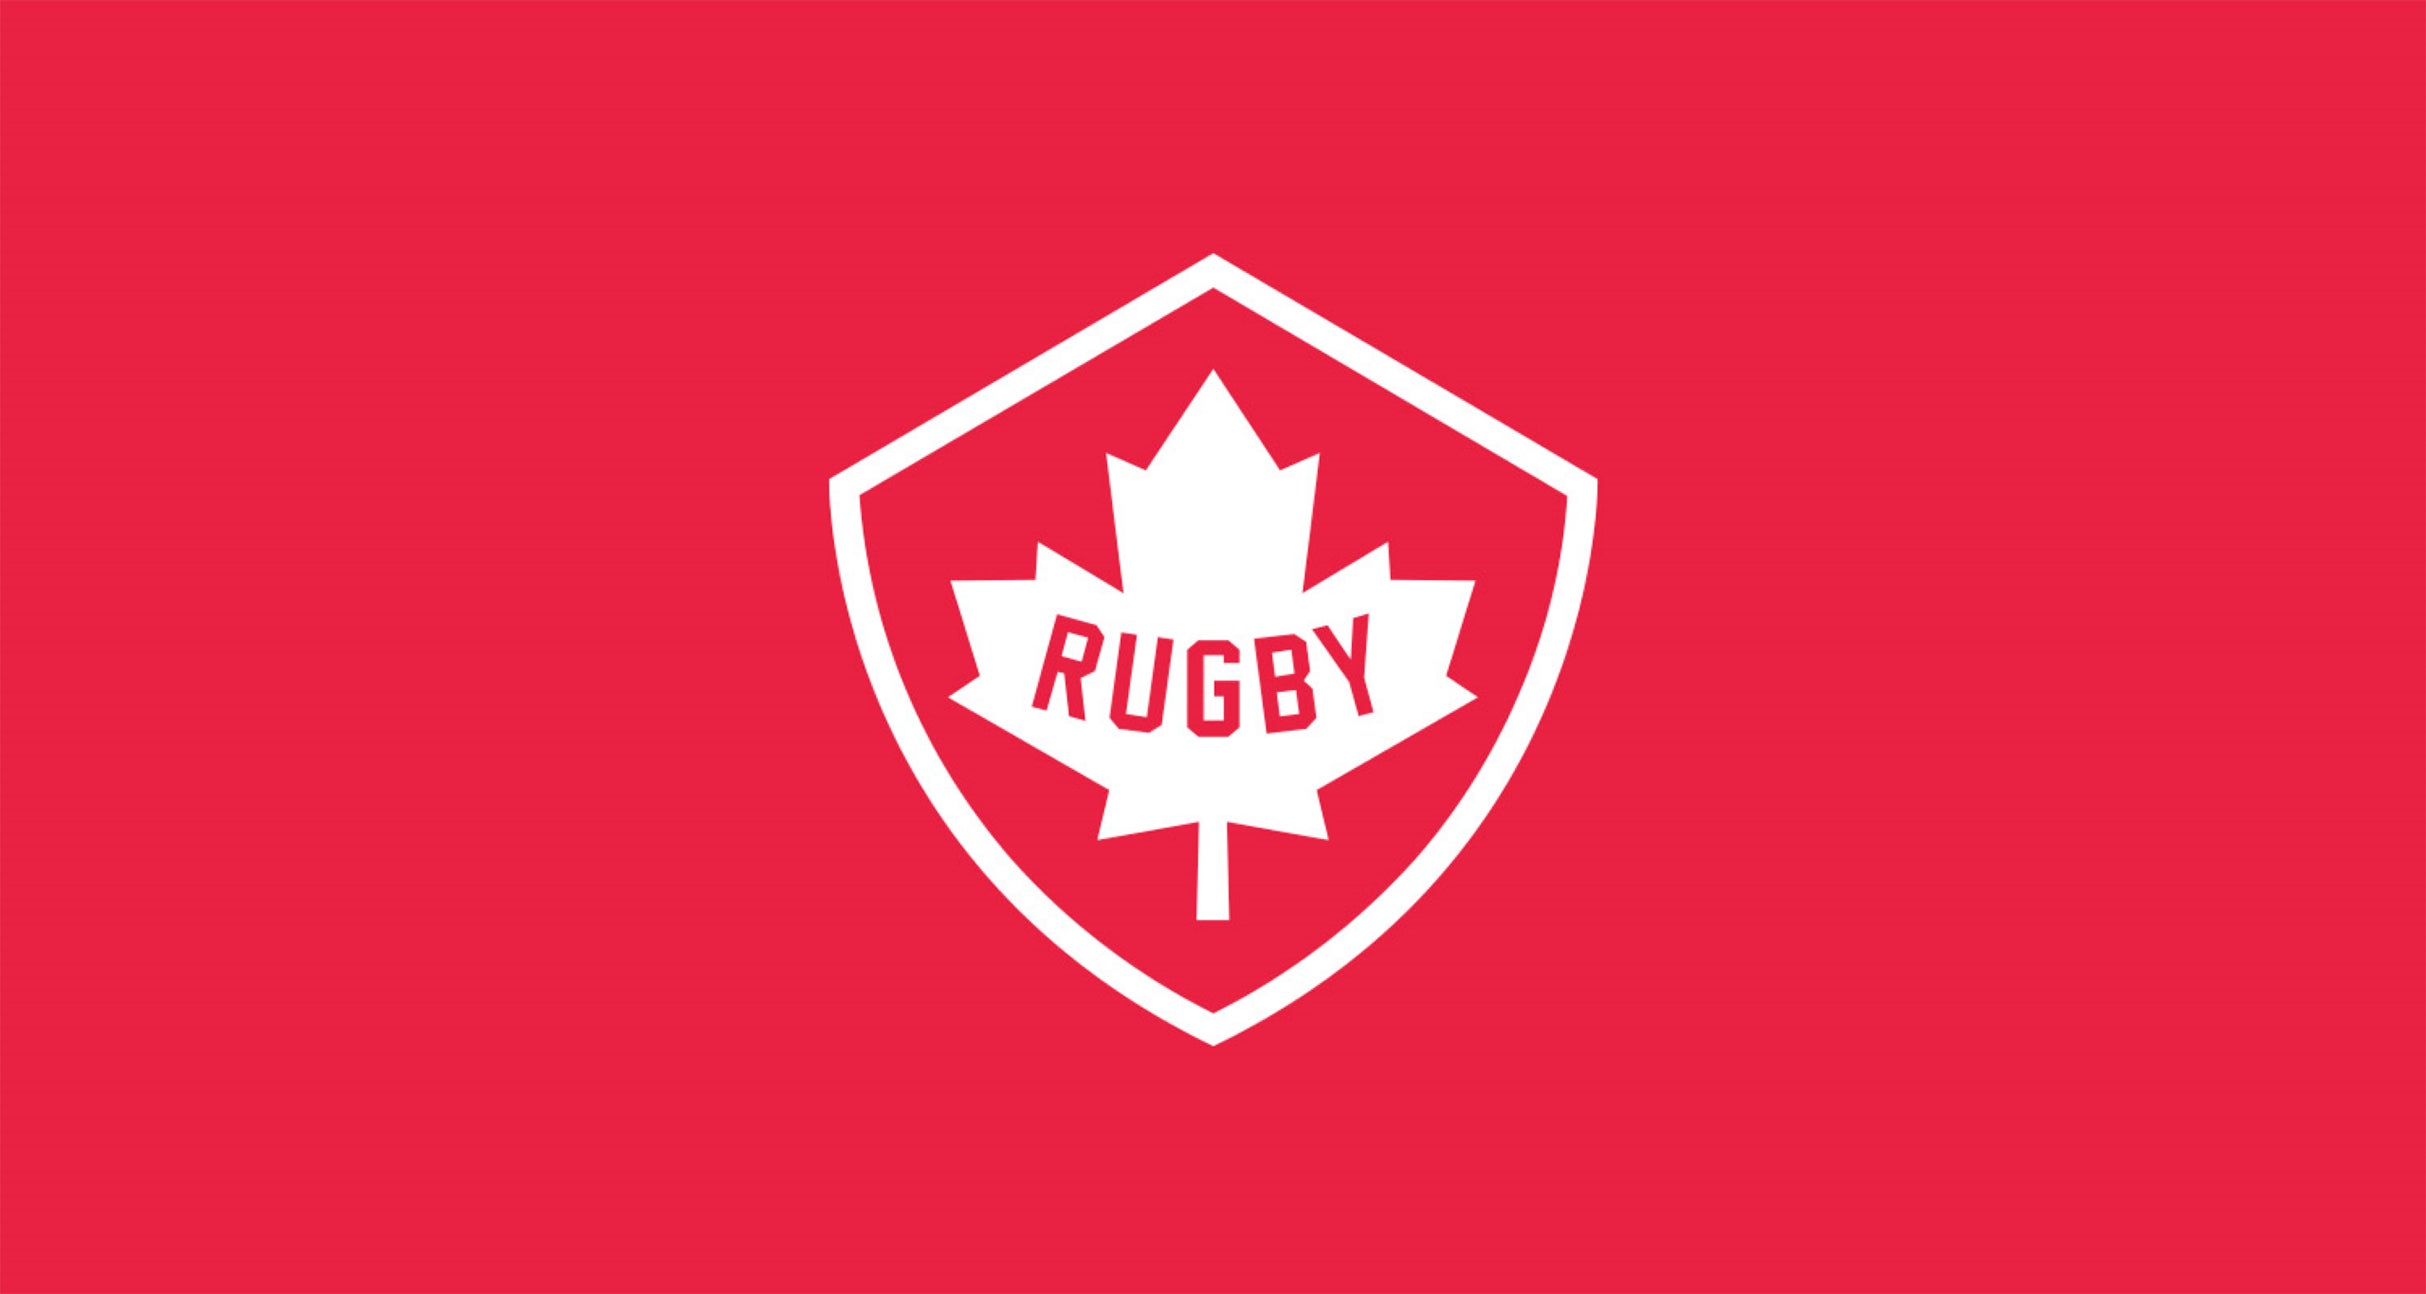 Canada Men's Rugby v. Scotland in Ottawa promo photo for Rugby Canada Promo presale offer code